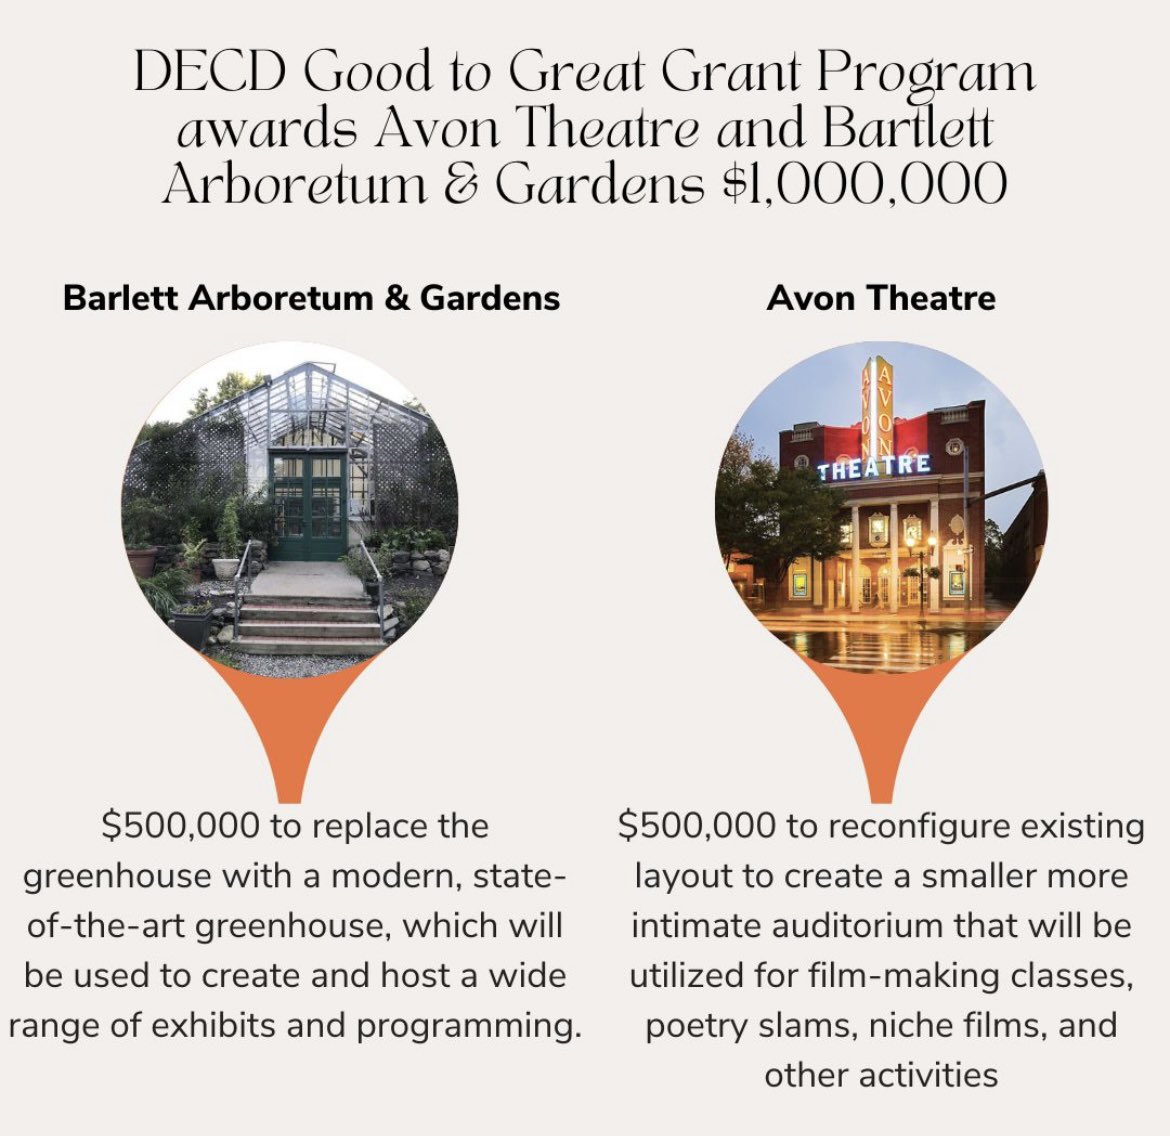 Exciting news! The @AvonTheatre & @BartlettArbor will each receive $500,000 for upgrades & infrastructure improvements through the @CTDECD Good to Great grant program, which supports nonprofit arts, cultural, and history organizations.